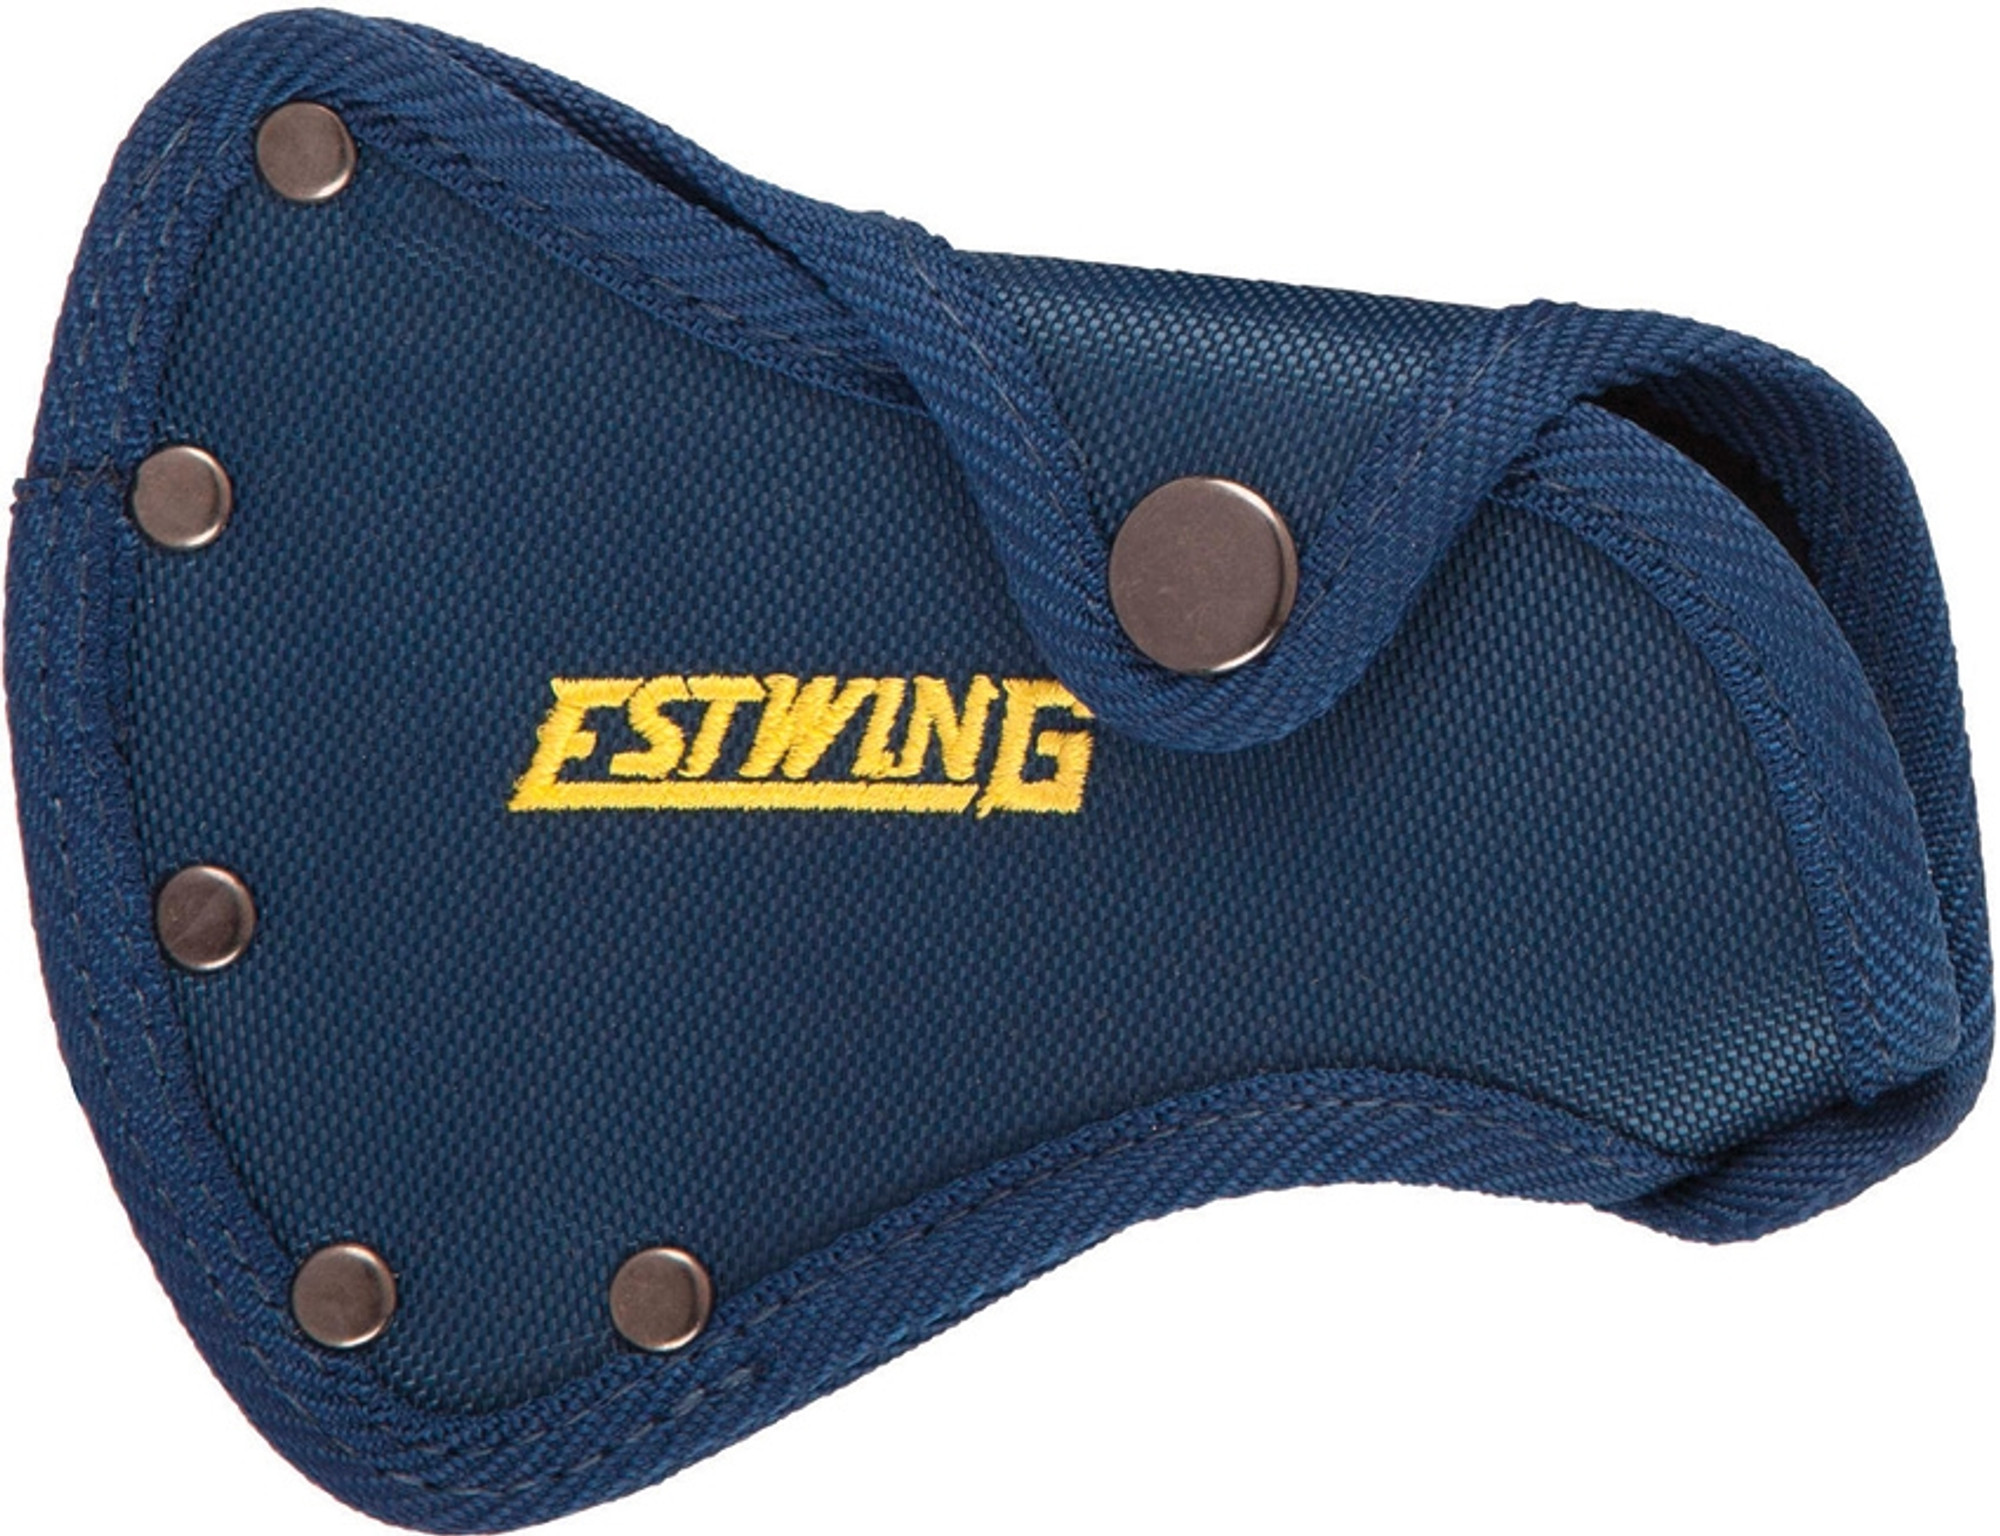 Axe Replacement Sheath Blue